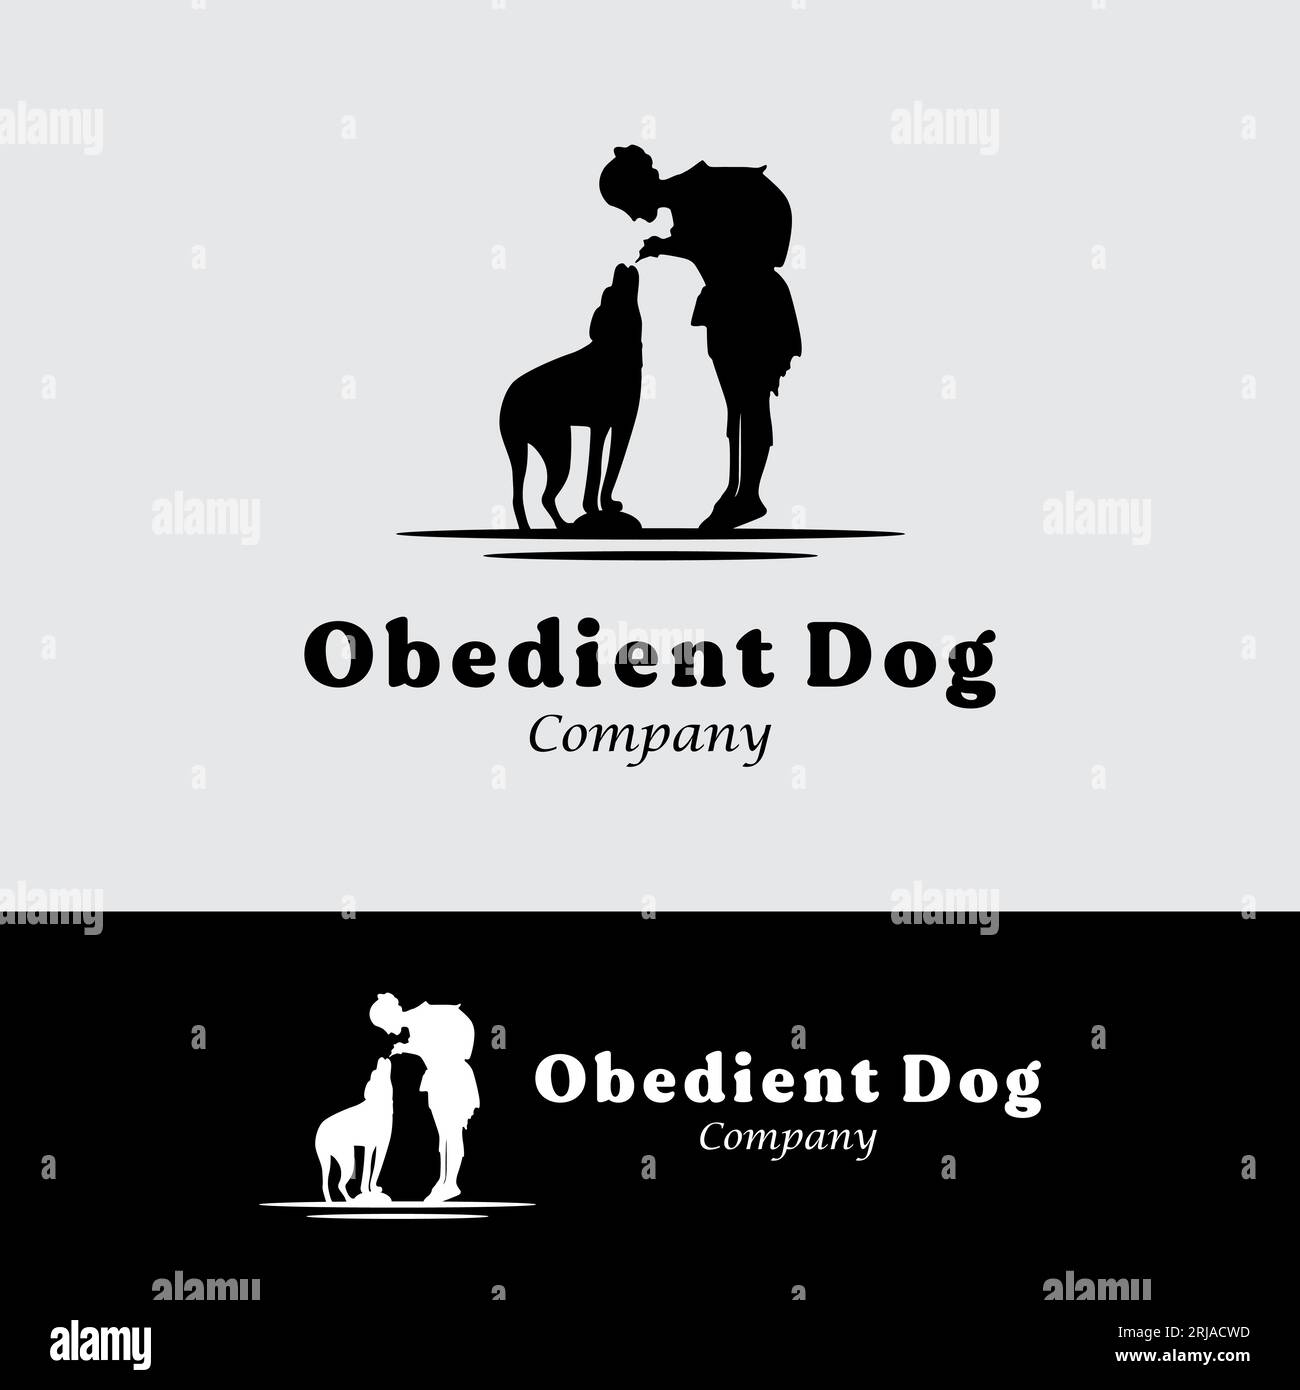 Dog And Girl Silhouette For Animal Trainer Logo Or Company Design Inspiration Stock Vector